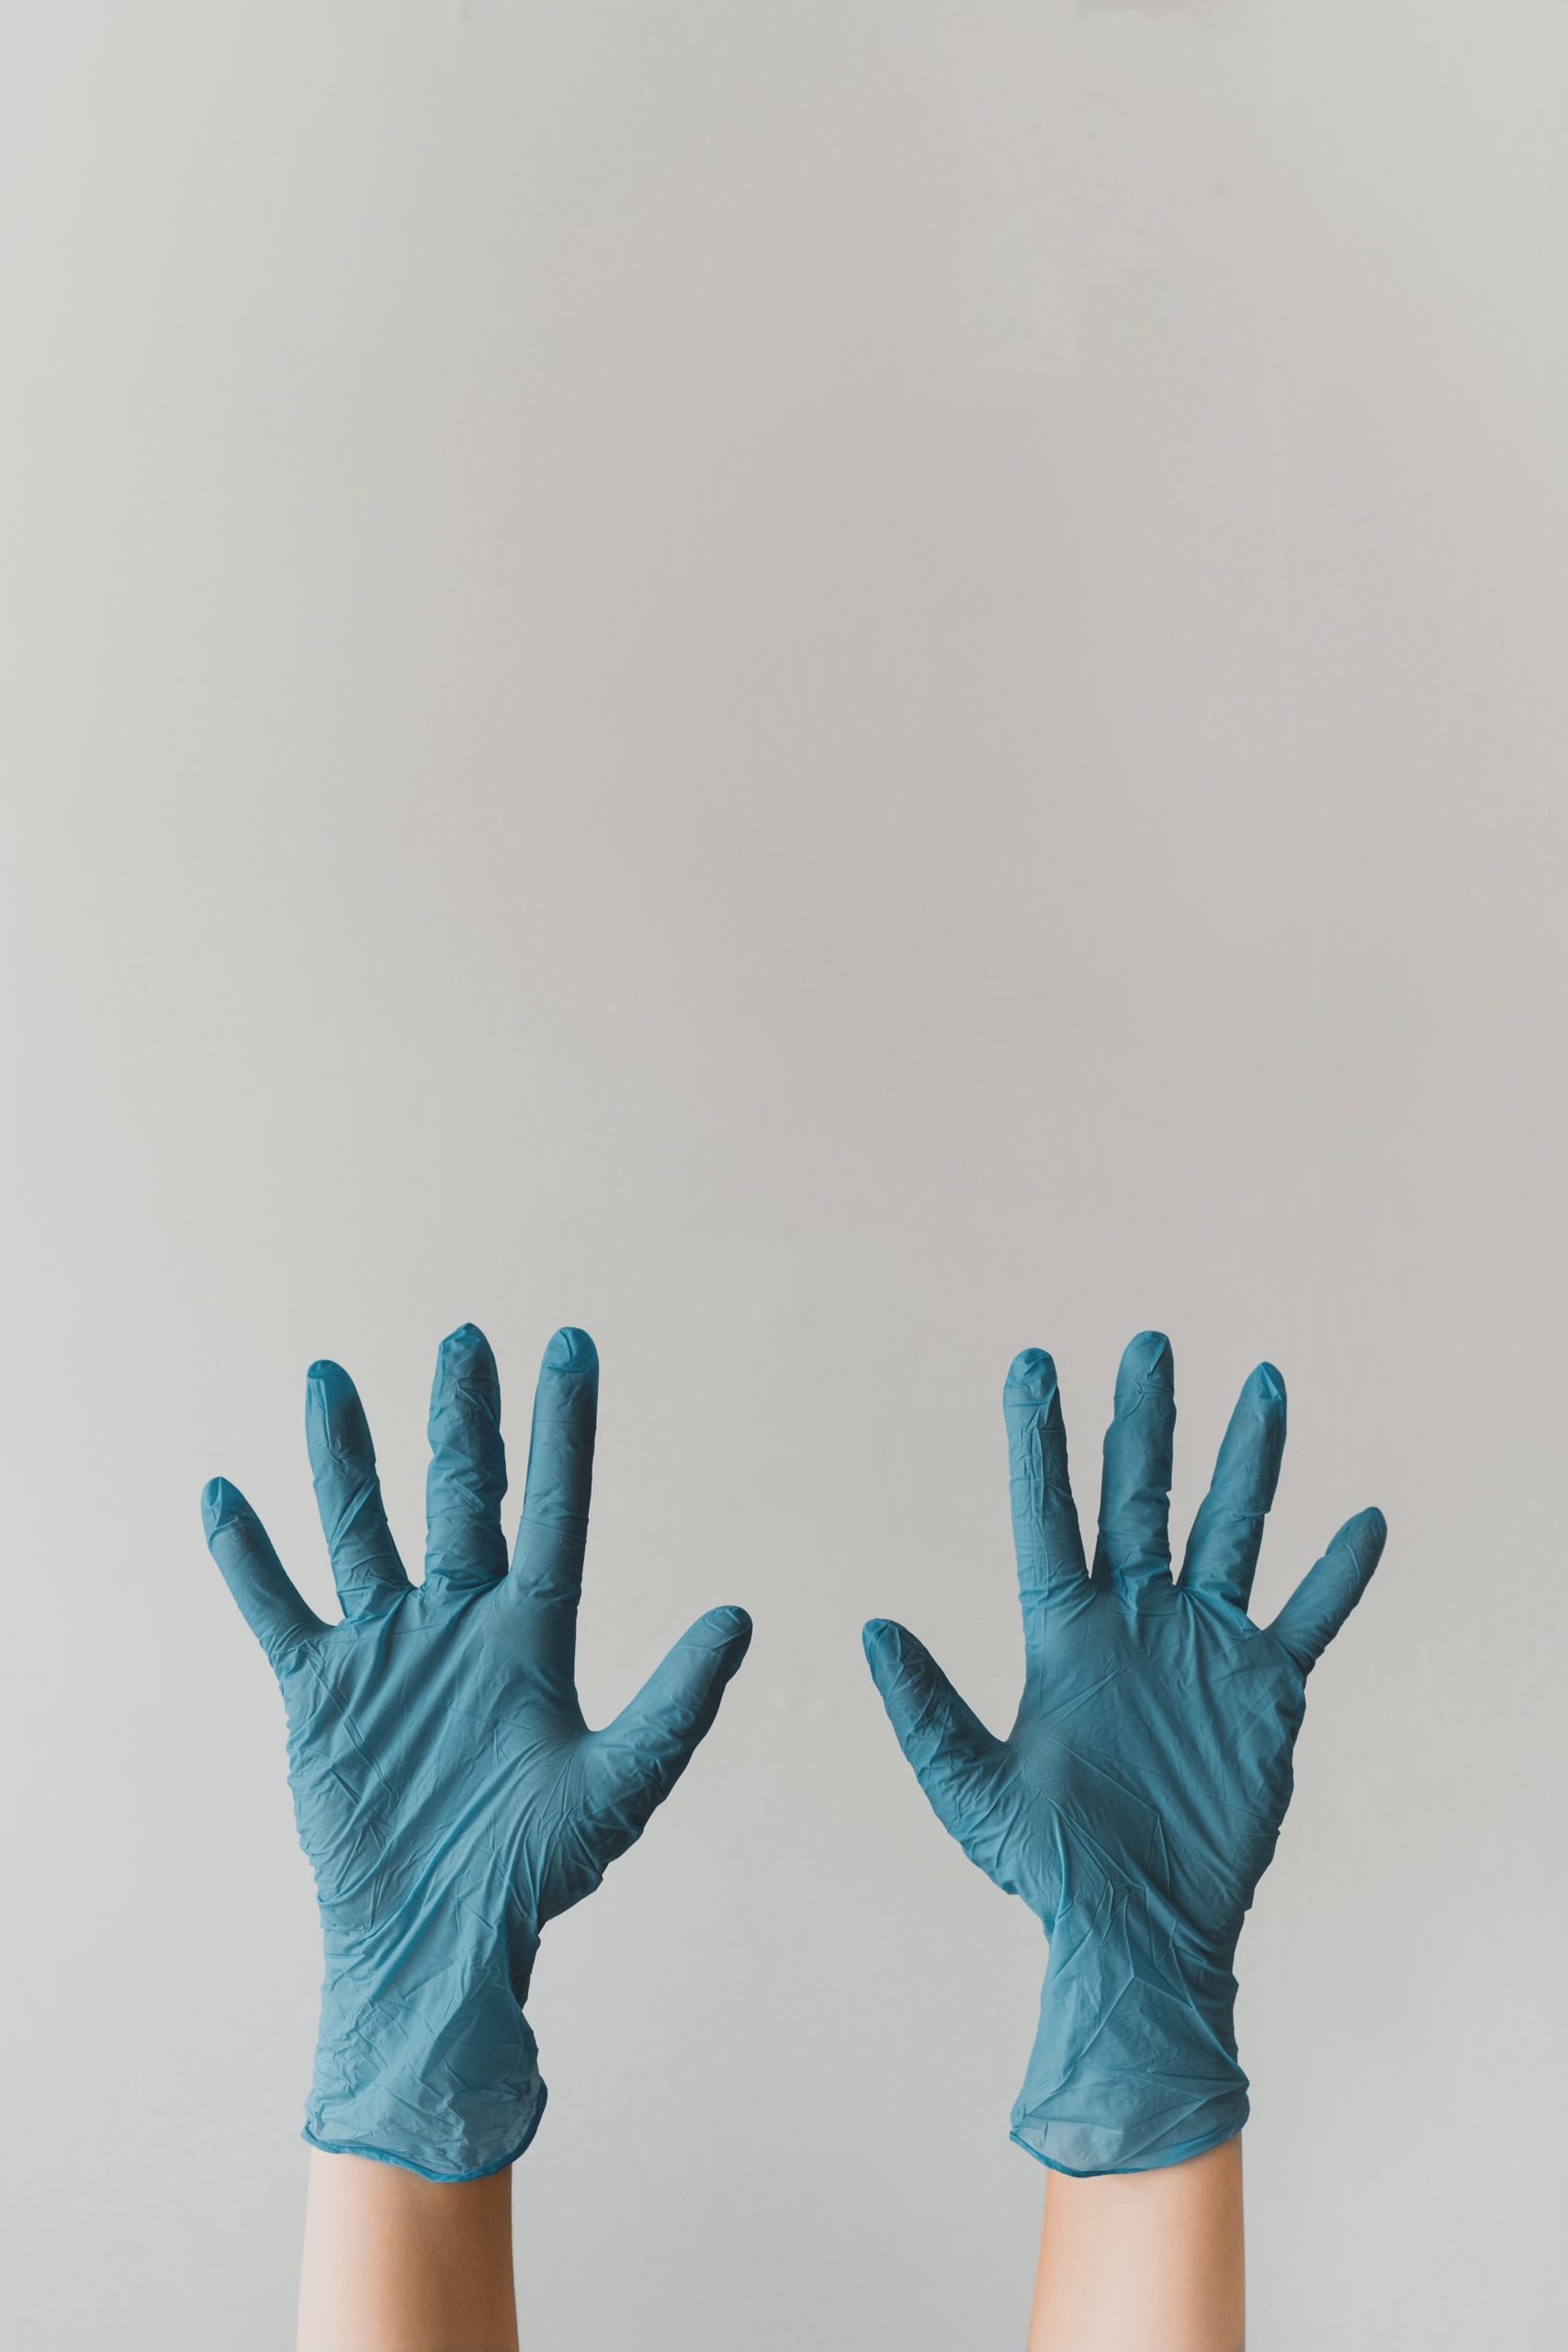 A person wearing blue gloves holding up their hands